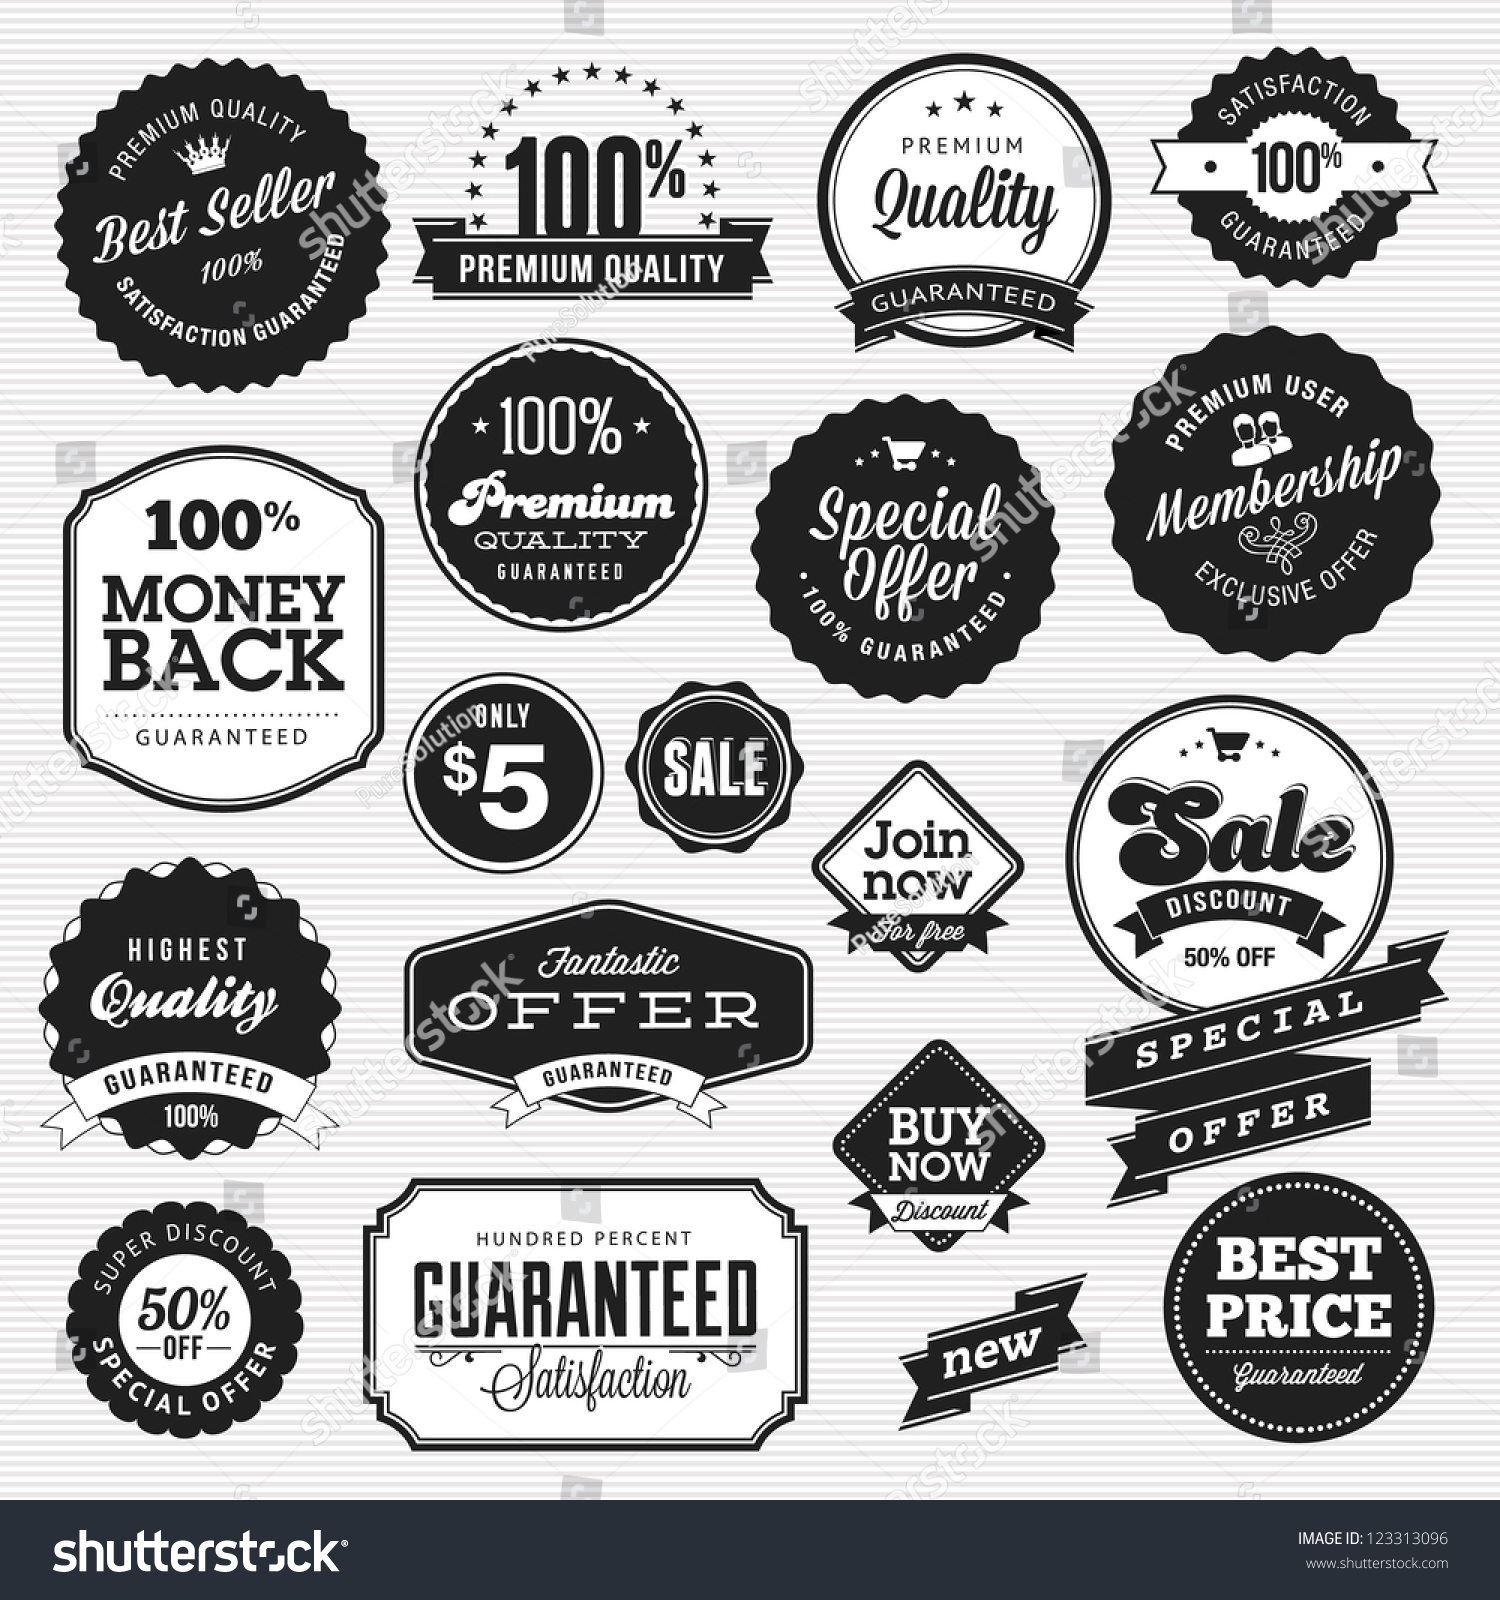 Set Of Badges And Stickers For Sale Stock Vector Illustration 123313096 ...